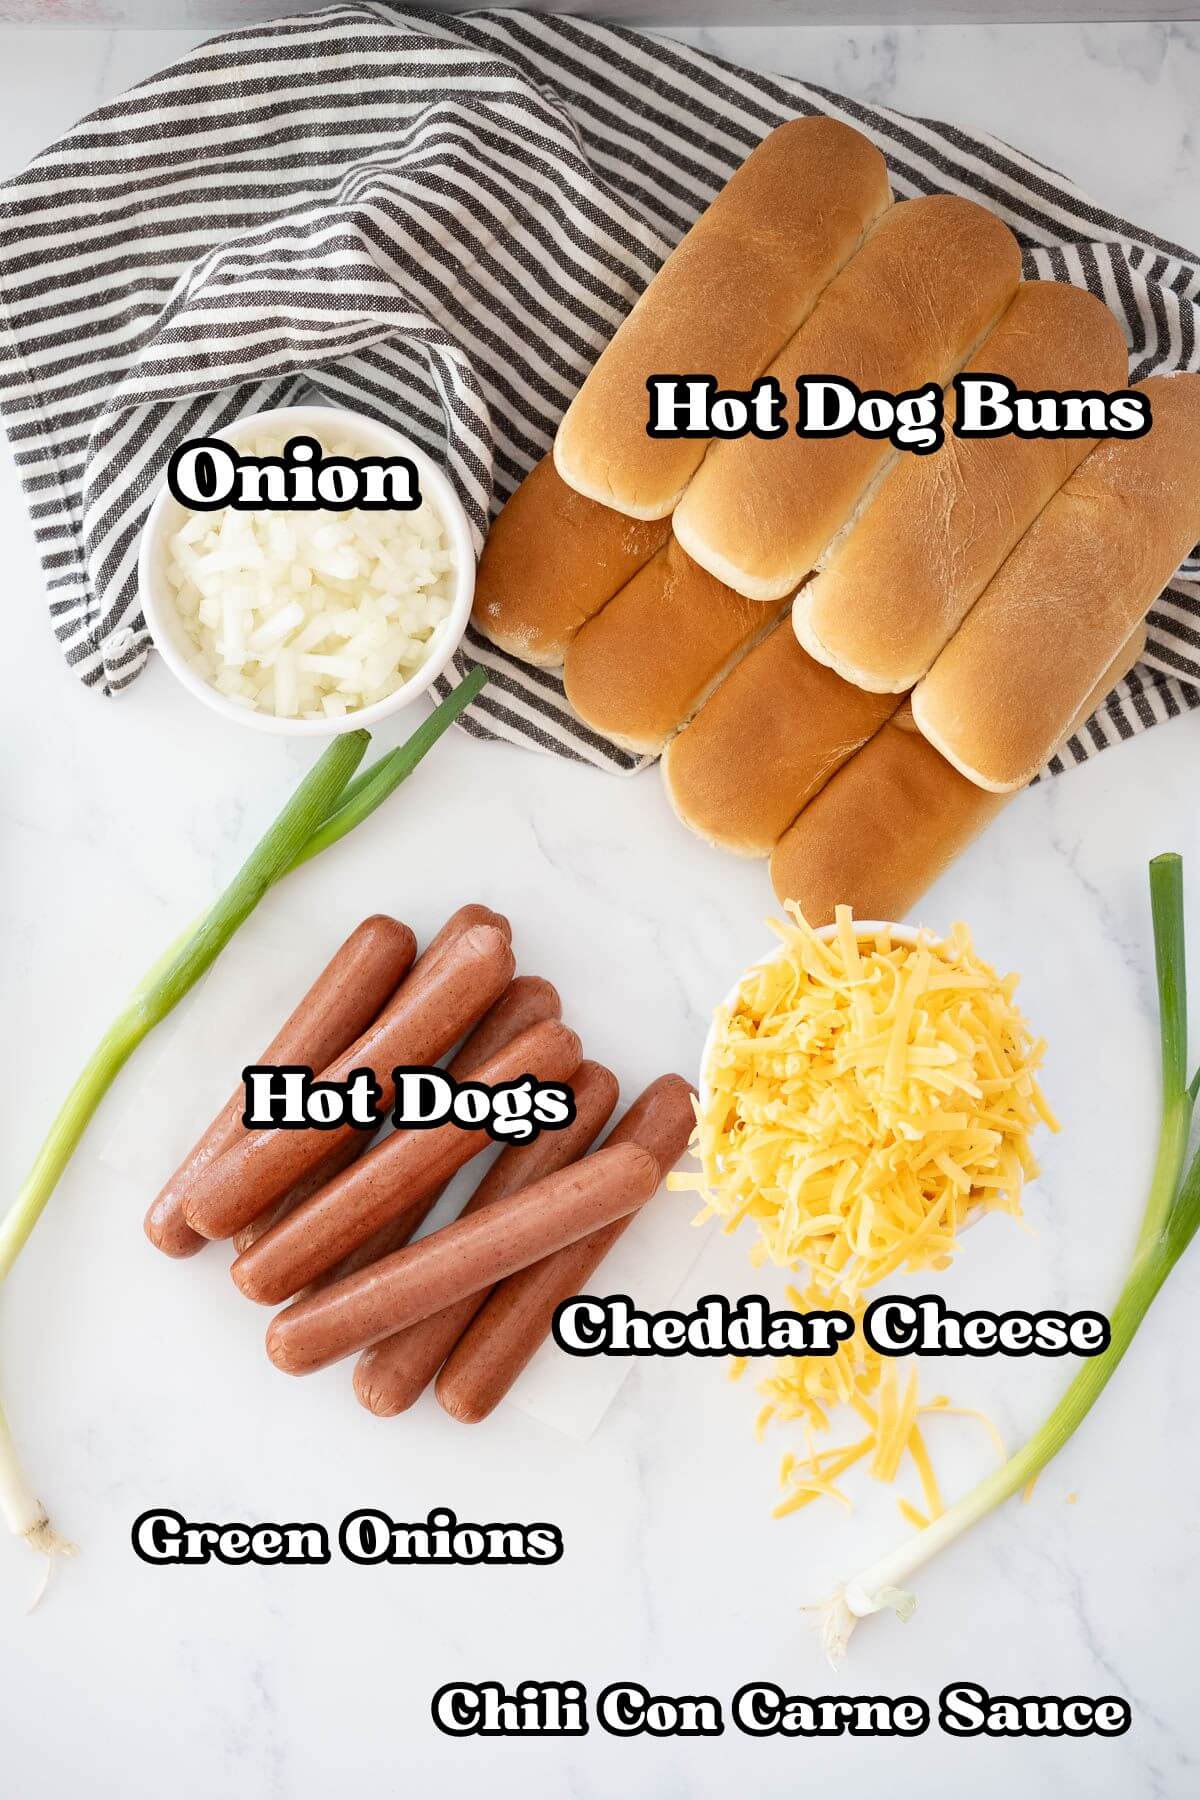 Chili Cheese Dog Bake recipe labeled ingredients second group.